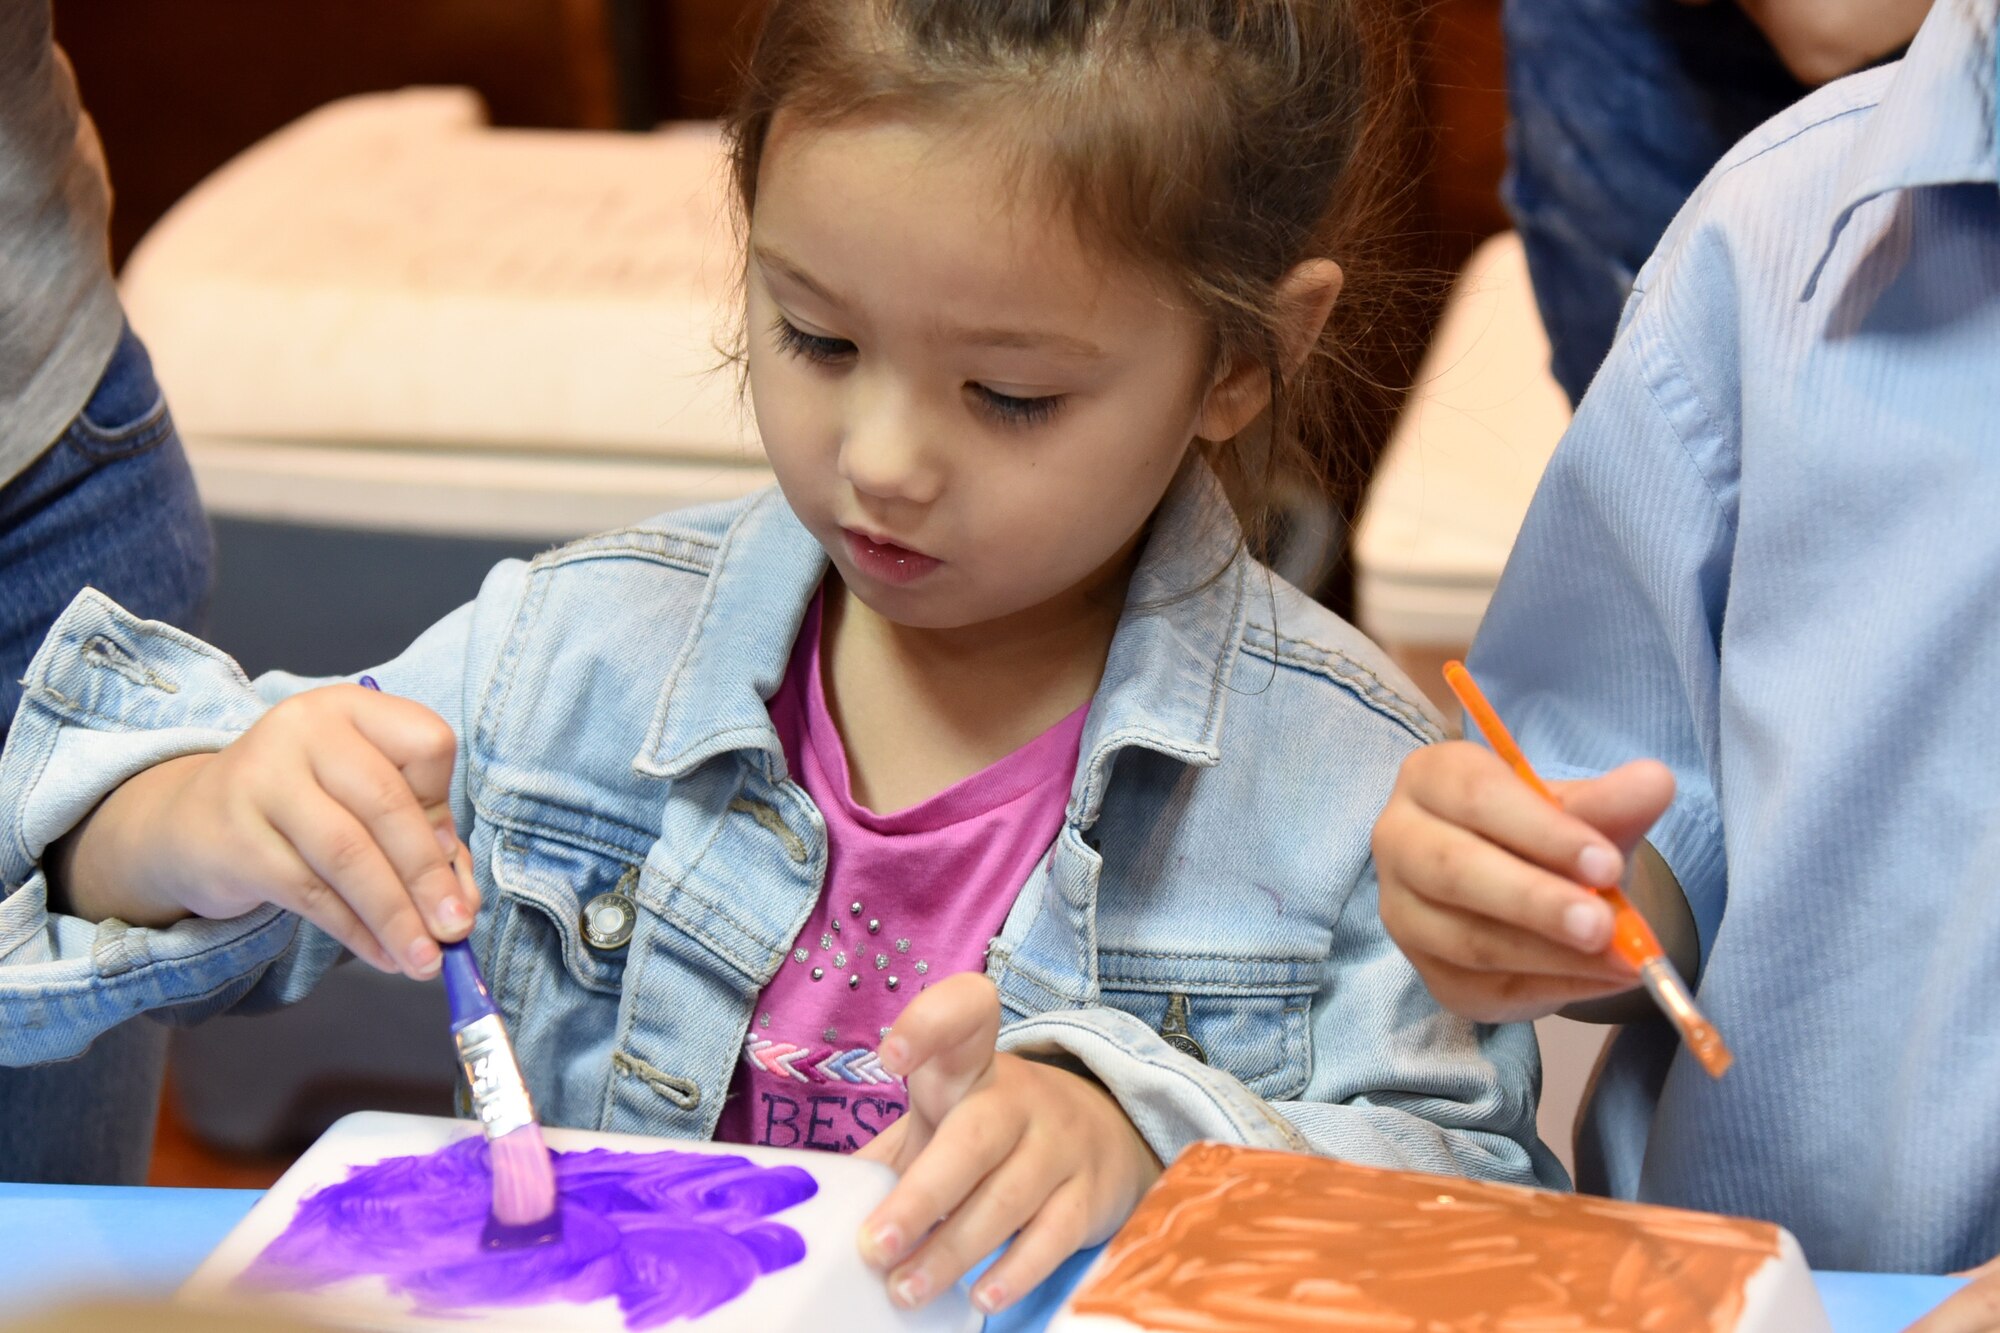 Children of command-sponsored families paint during Vacation Bible School at Al Udeid Air Base, Qatar, May 24, 2018. The two-day event, hosted by the 379th Air Expeditionary Wing Chaplain Corps, integrated biblical lessons and team-building activities. (U.S. Air Force photo by Staff Sgt. Enjoli Saunders)